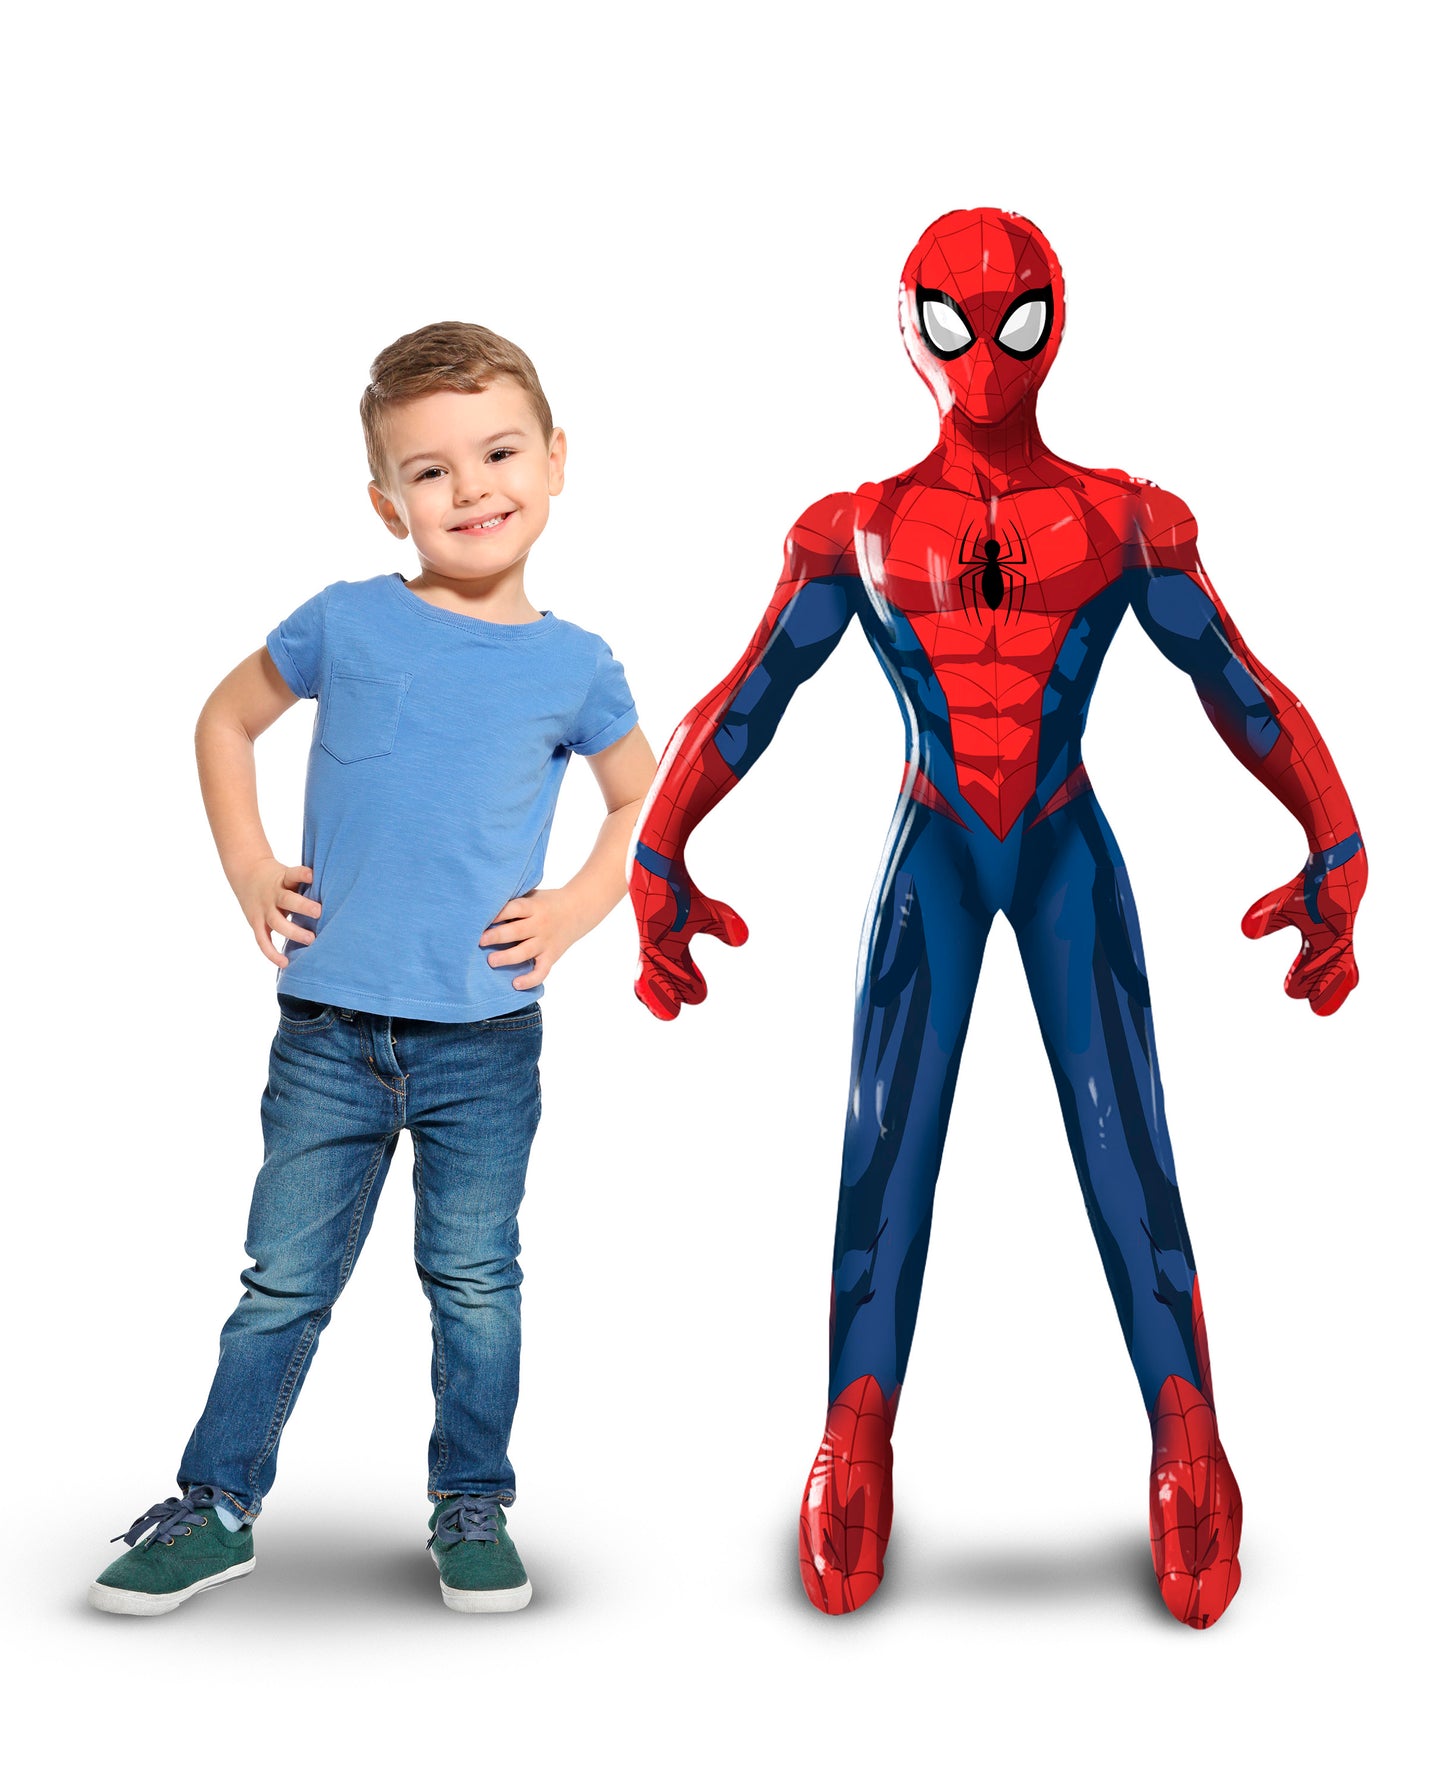 Marvel Spiderman 42" Inflatable Giant Round Float- Great Kids Gift Party Flavor